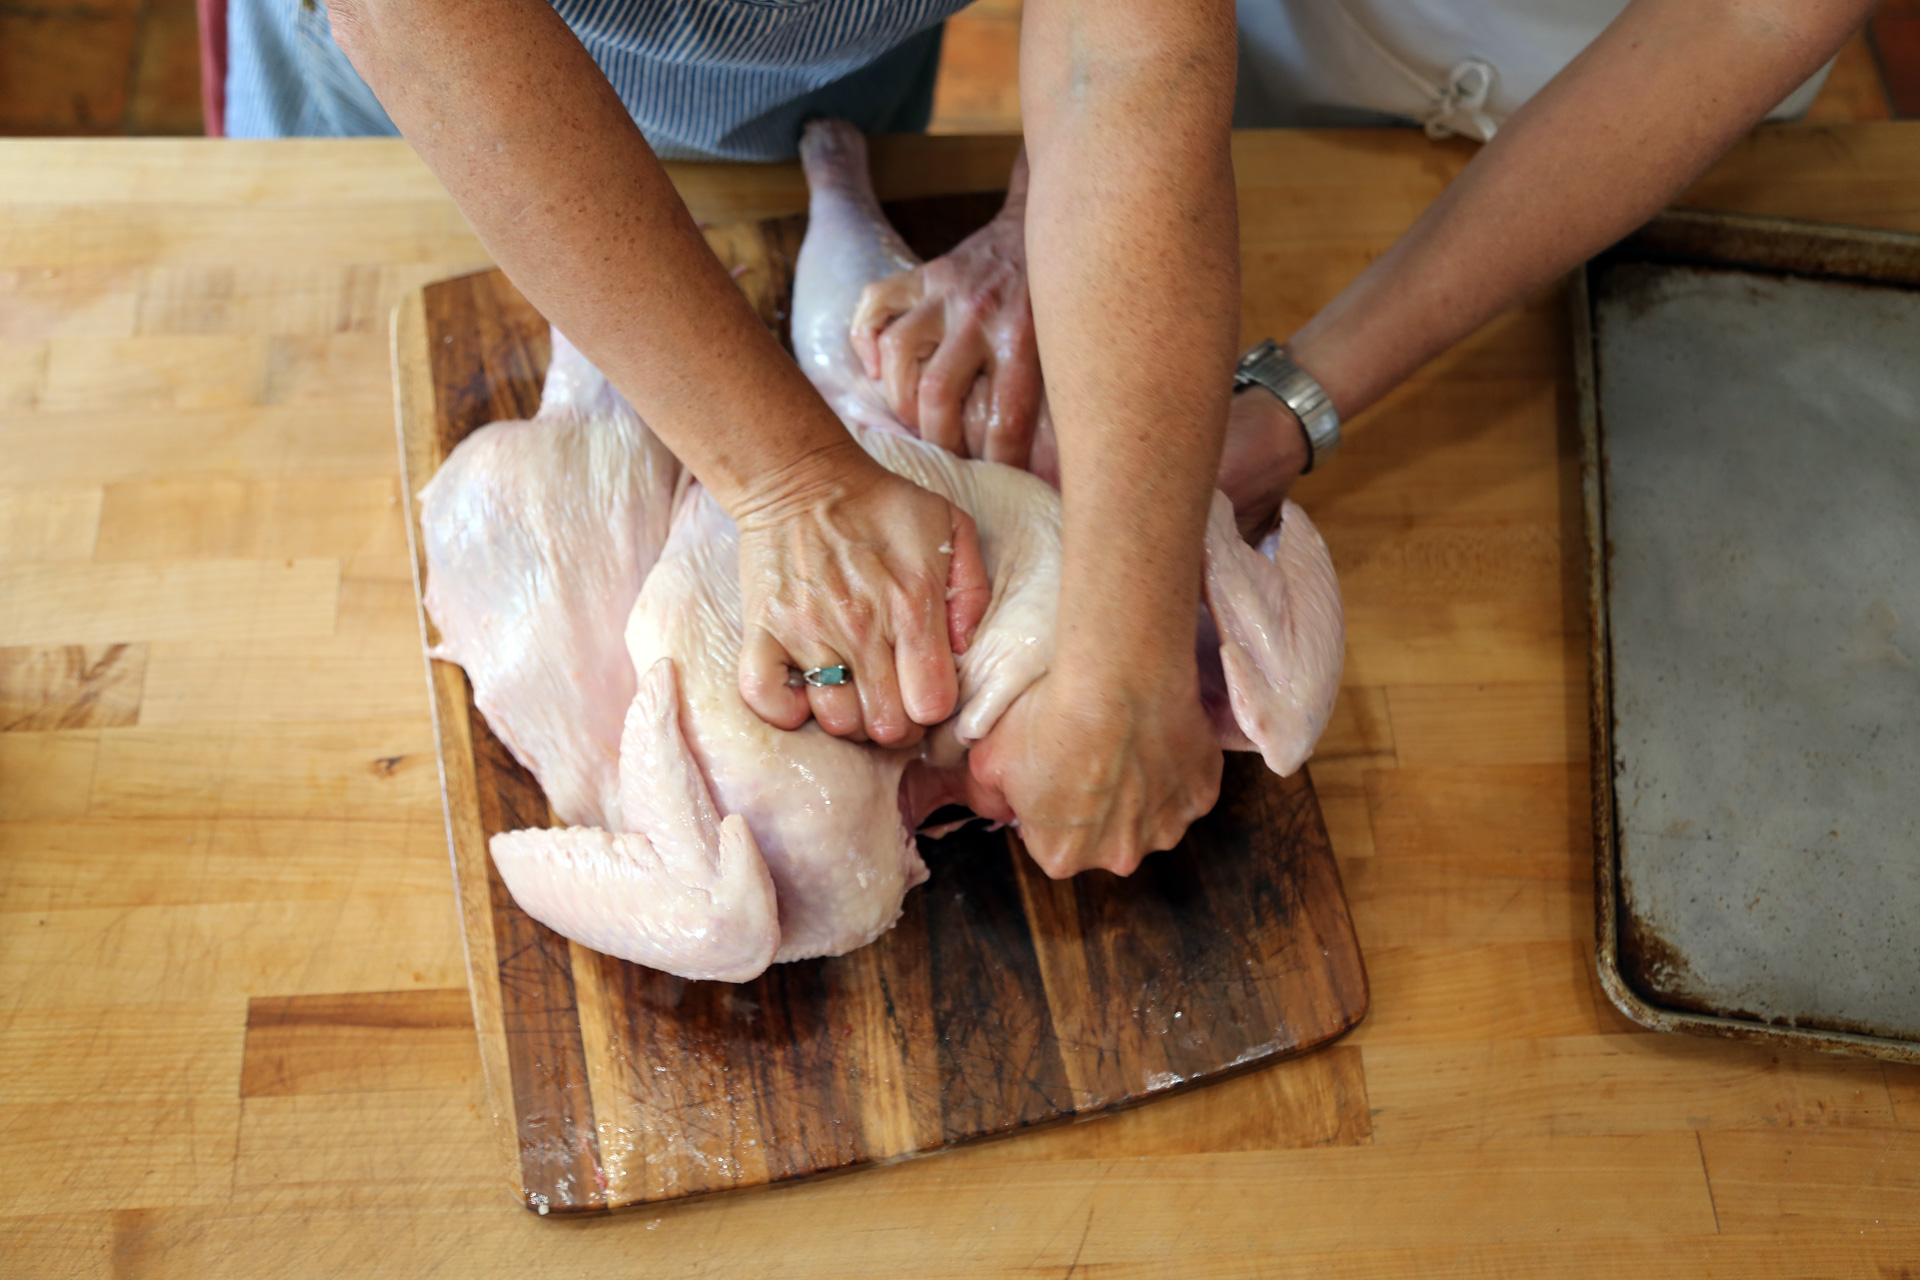 Turn the turkey over so it is breast-side-up and using both your hands and body weight, press down on the turkey to break the breastbone and flatten the bird.